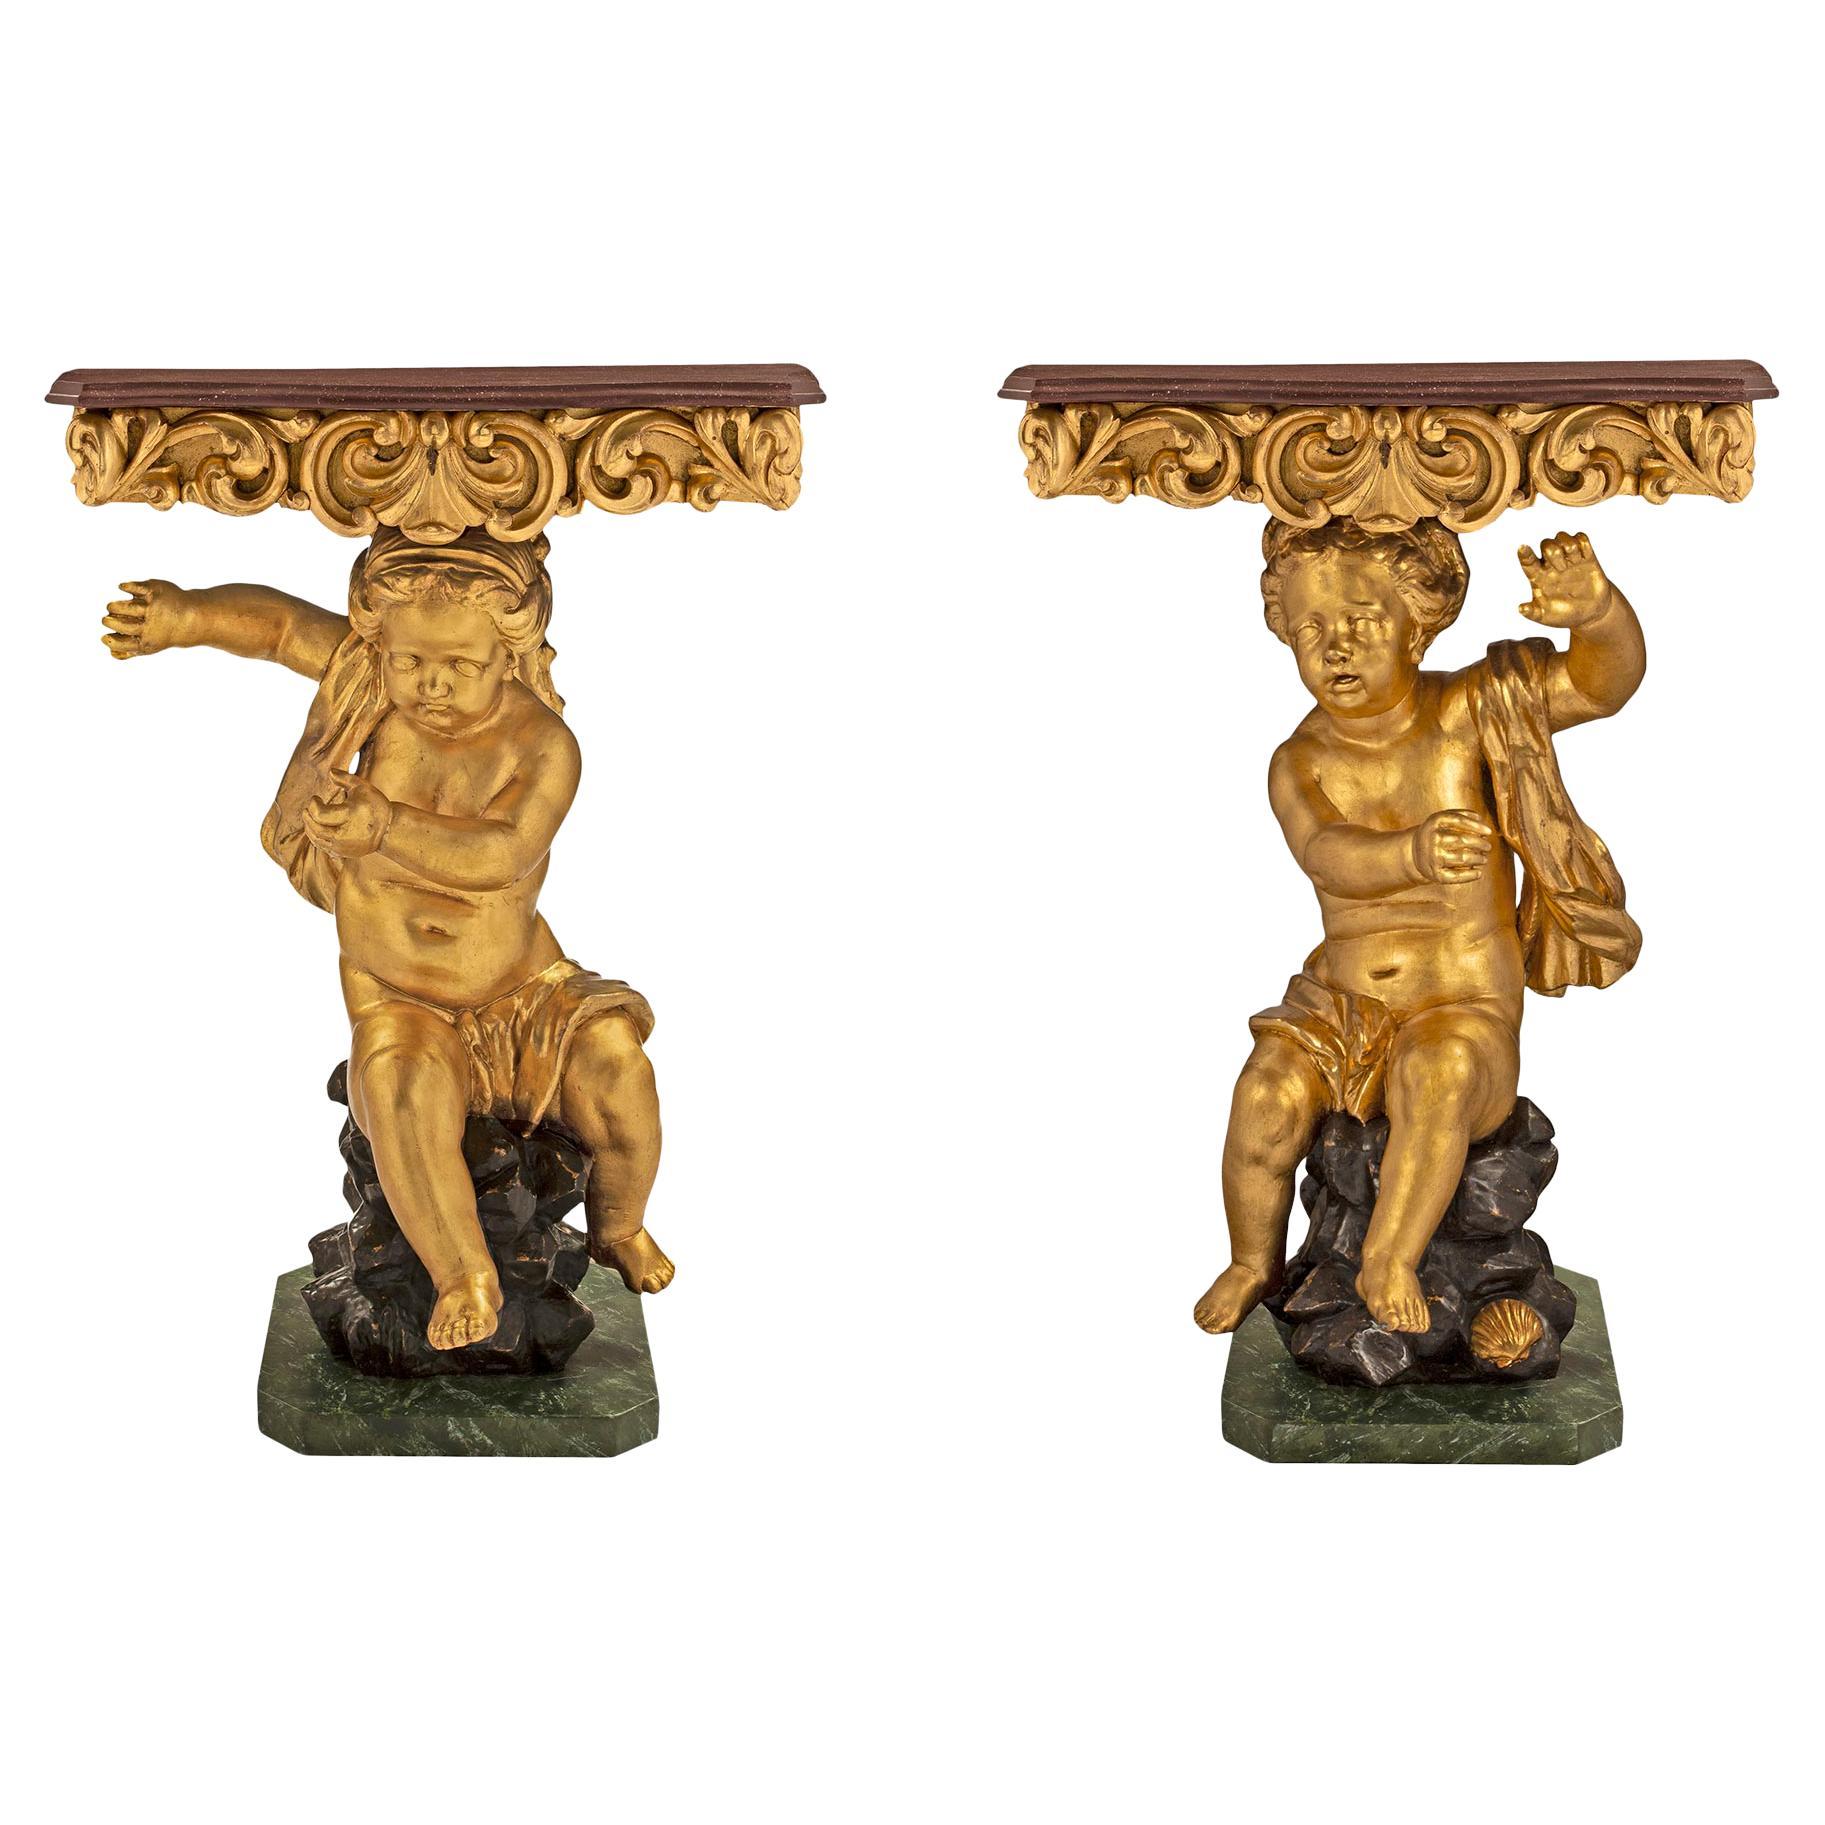 Pair of Italian 18th Century Baroque Giltwood and Faux Painted Consoles For Sale